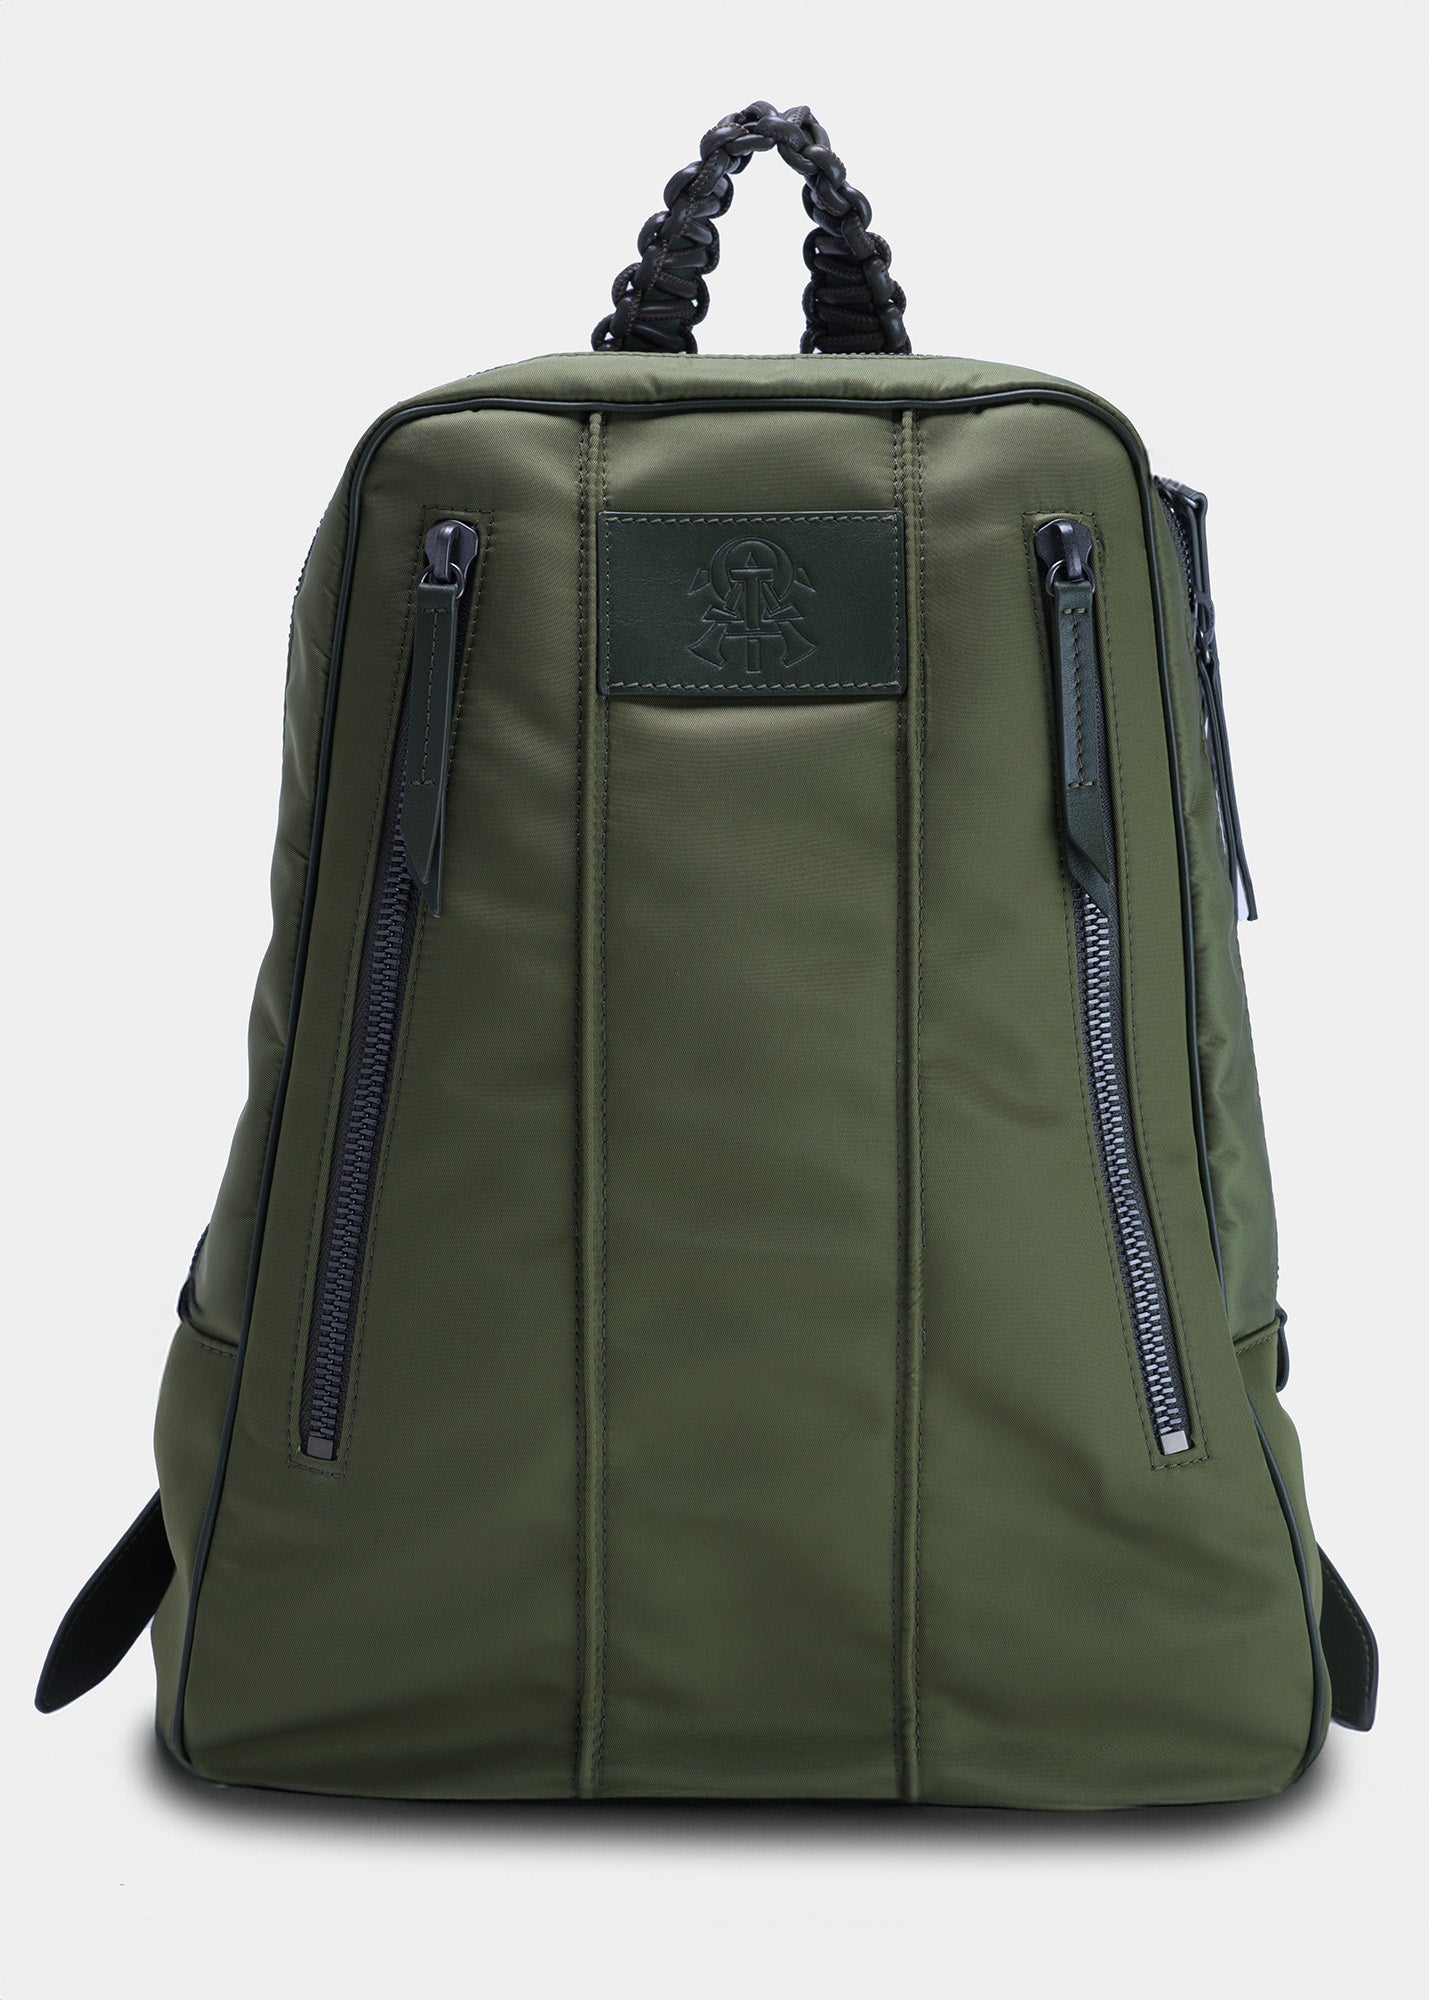 Savant Olive-Green Leather/Nylon Backpack, Small